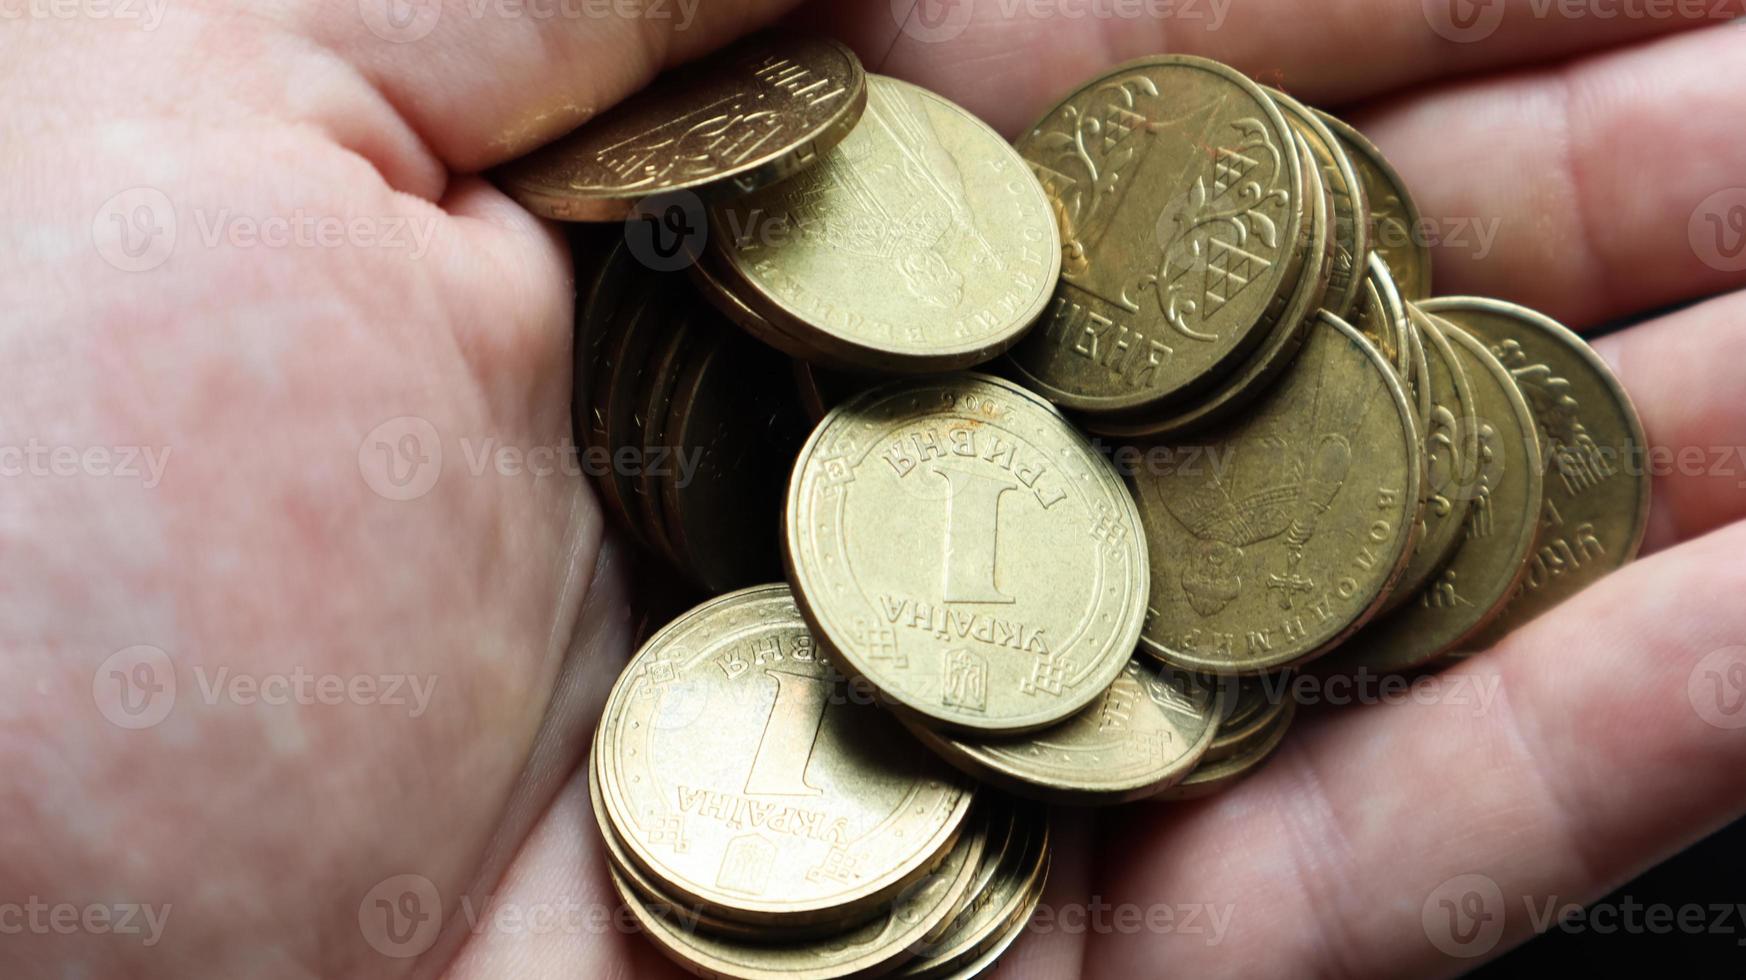 Ukrainian metal coins with a face value of 1 hryvnia in the palm of a male hand. A handful or pile of coins in the hands. Concept of retirement, savings and wealth, credit and mortgage, poverty. photo